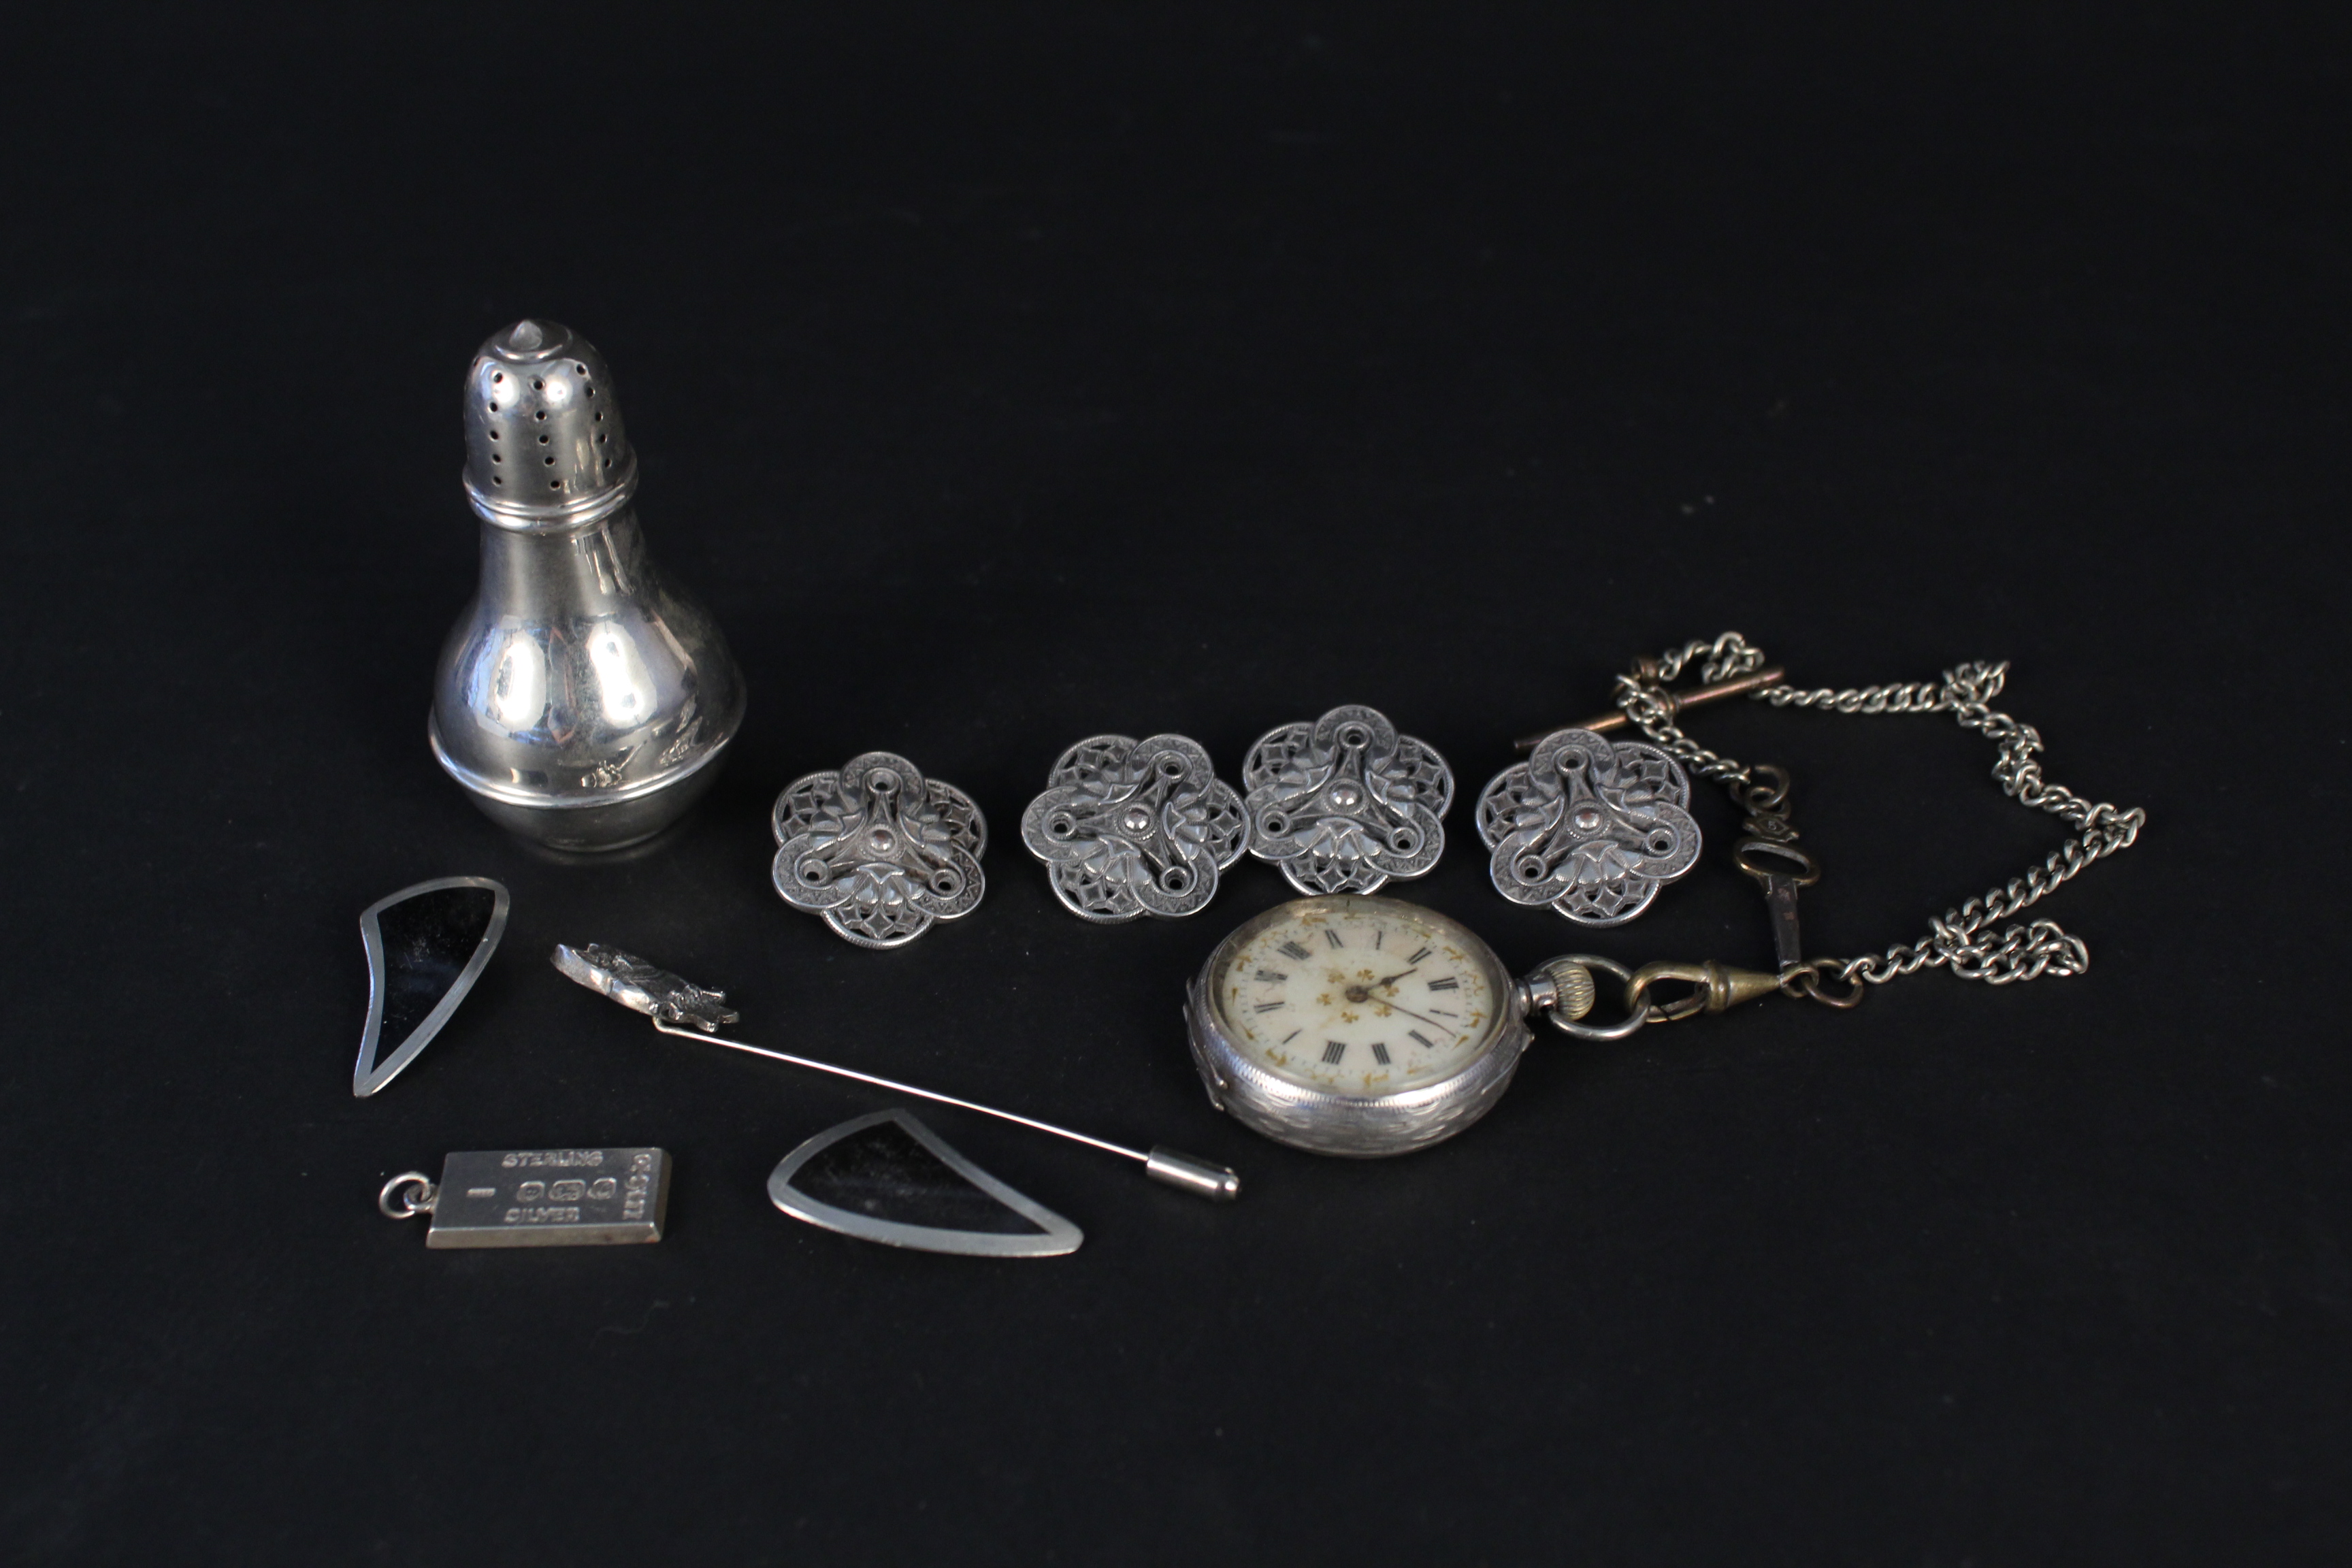 A small collection of silver and white metal items including a pair of J Jensen Danish earrings